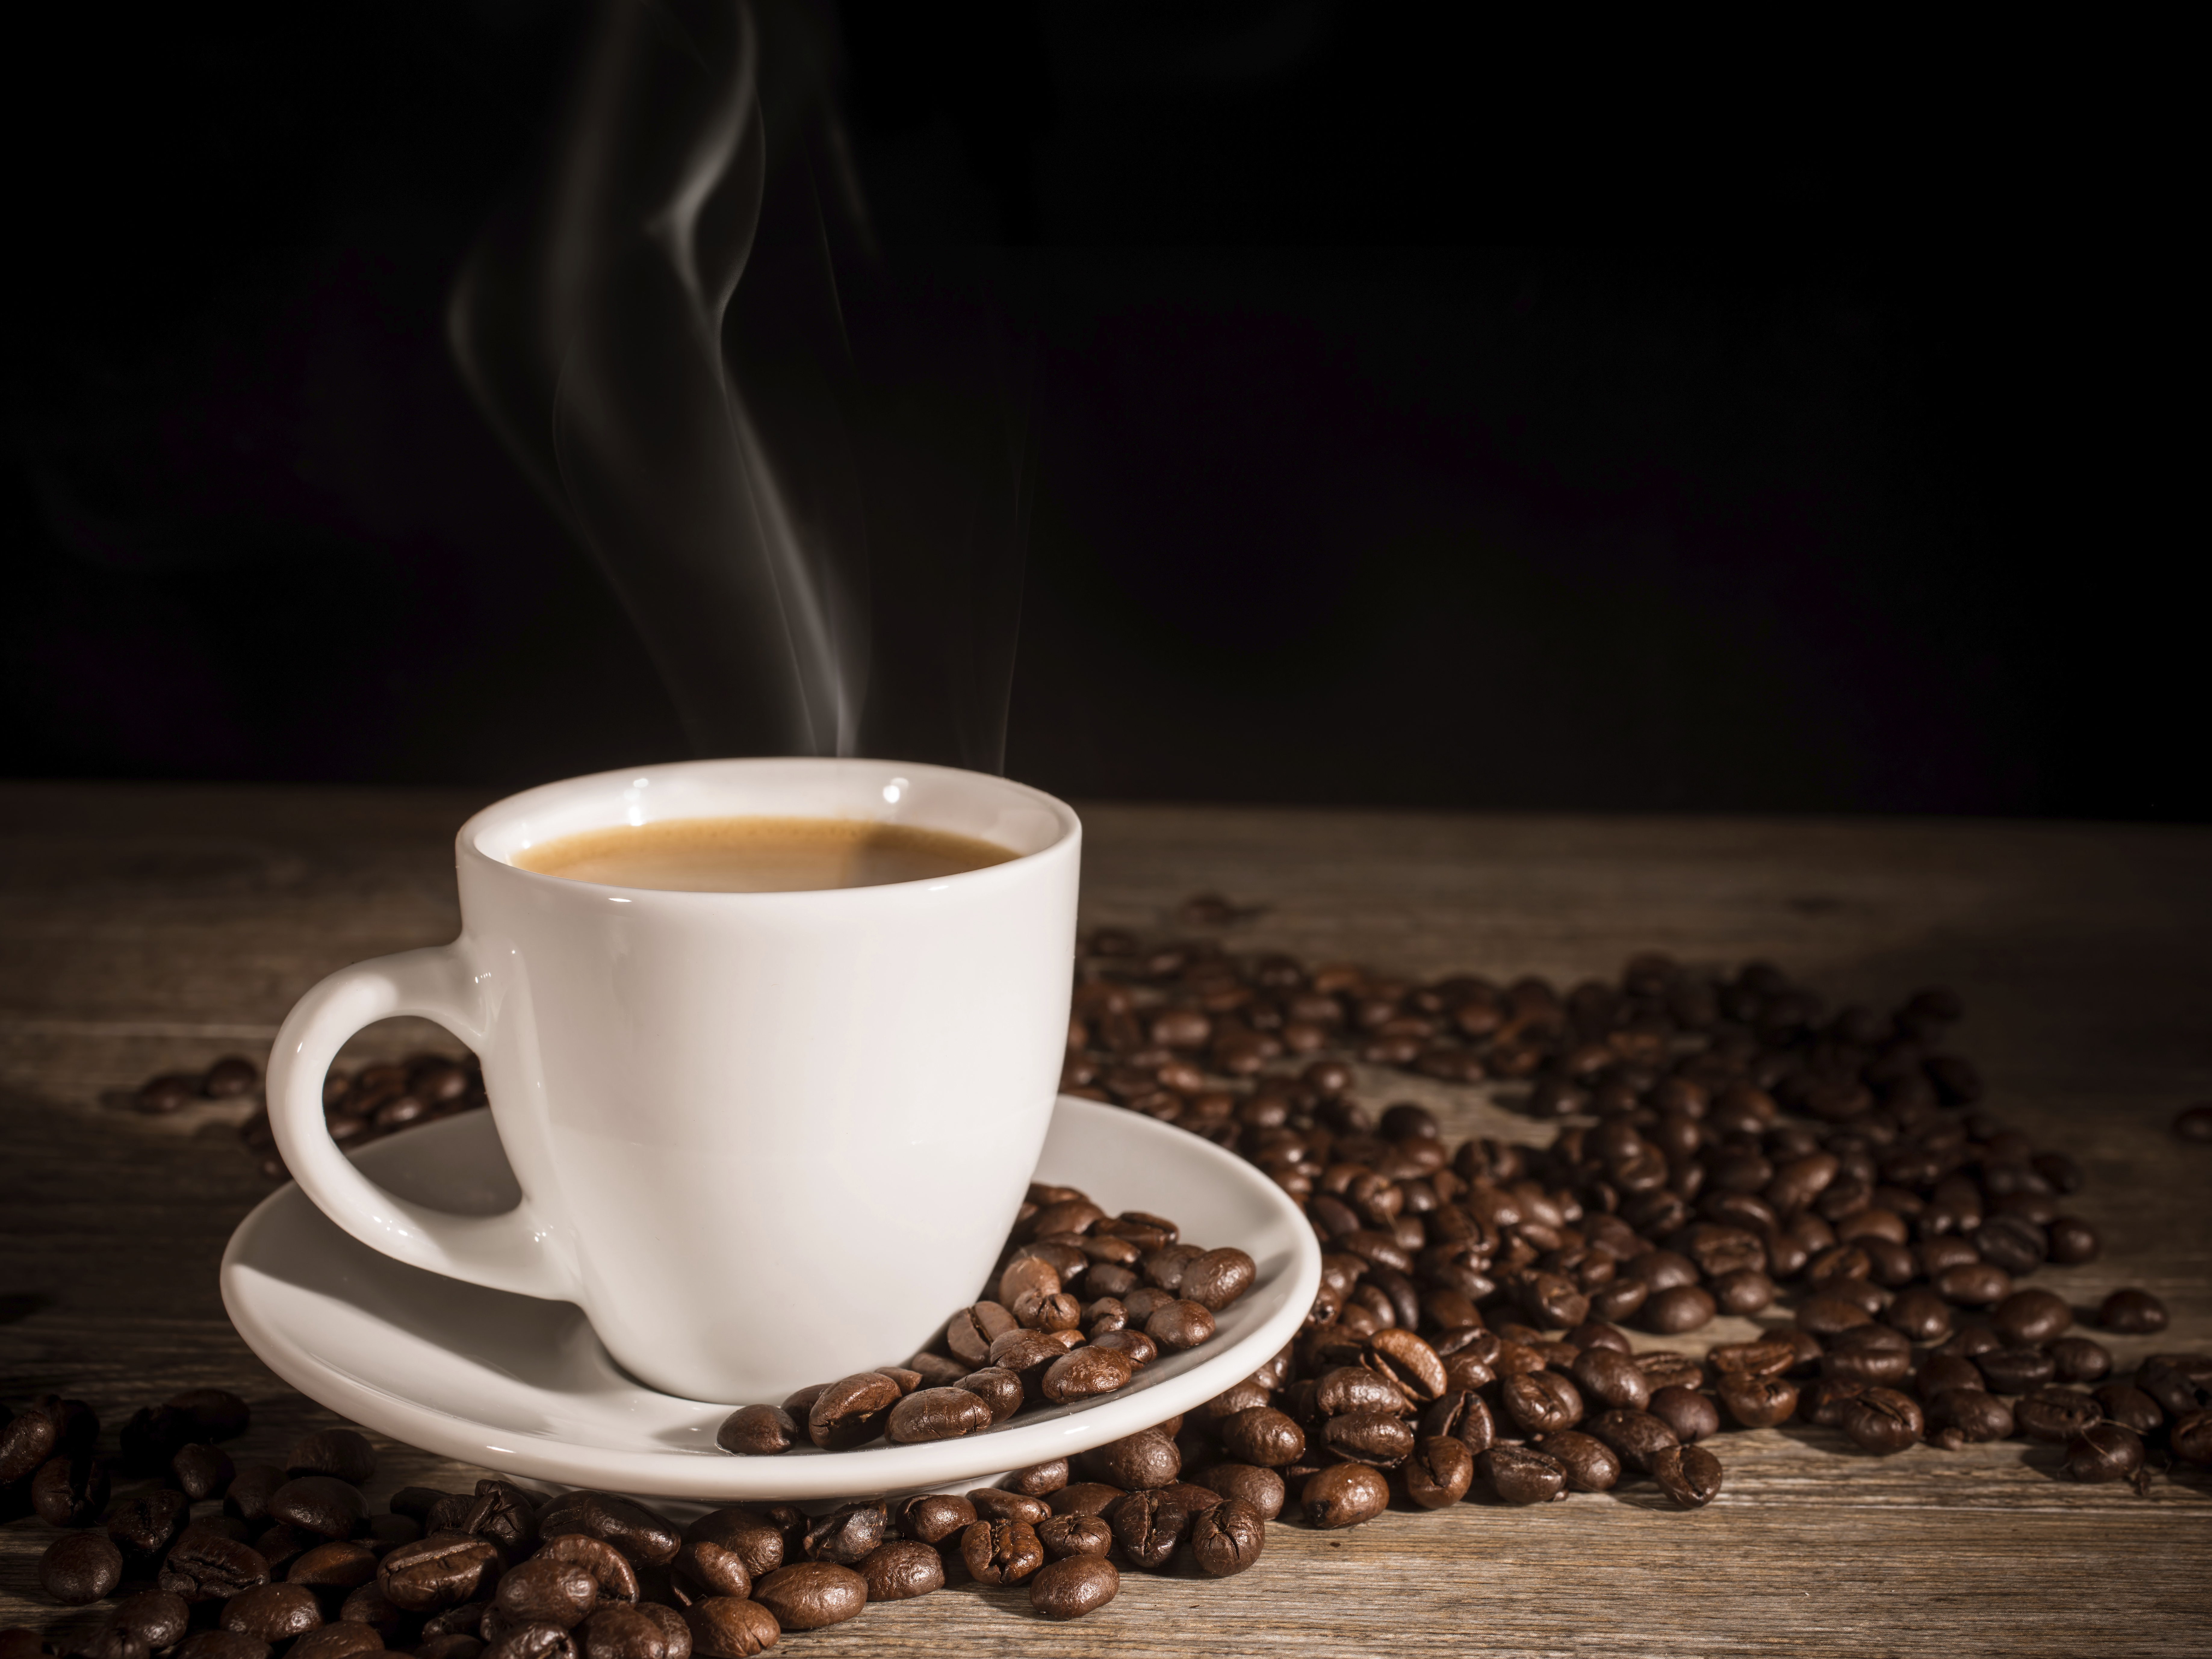 Coffee can cancel out cancer - Easy Health Options®